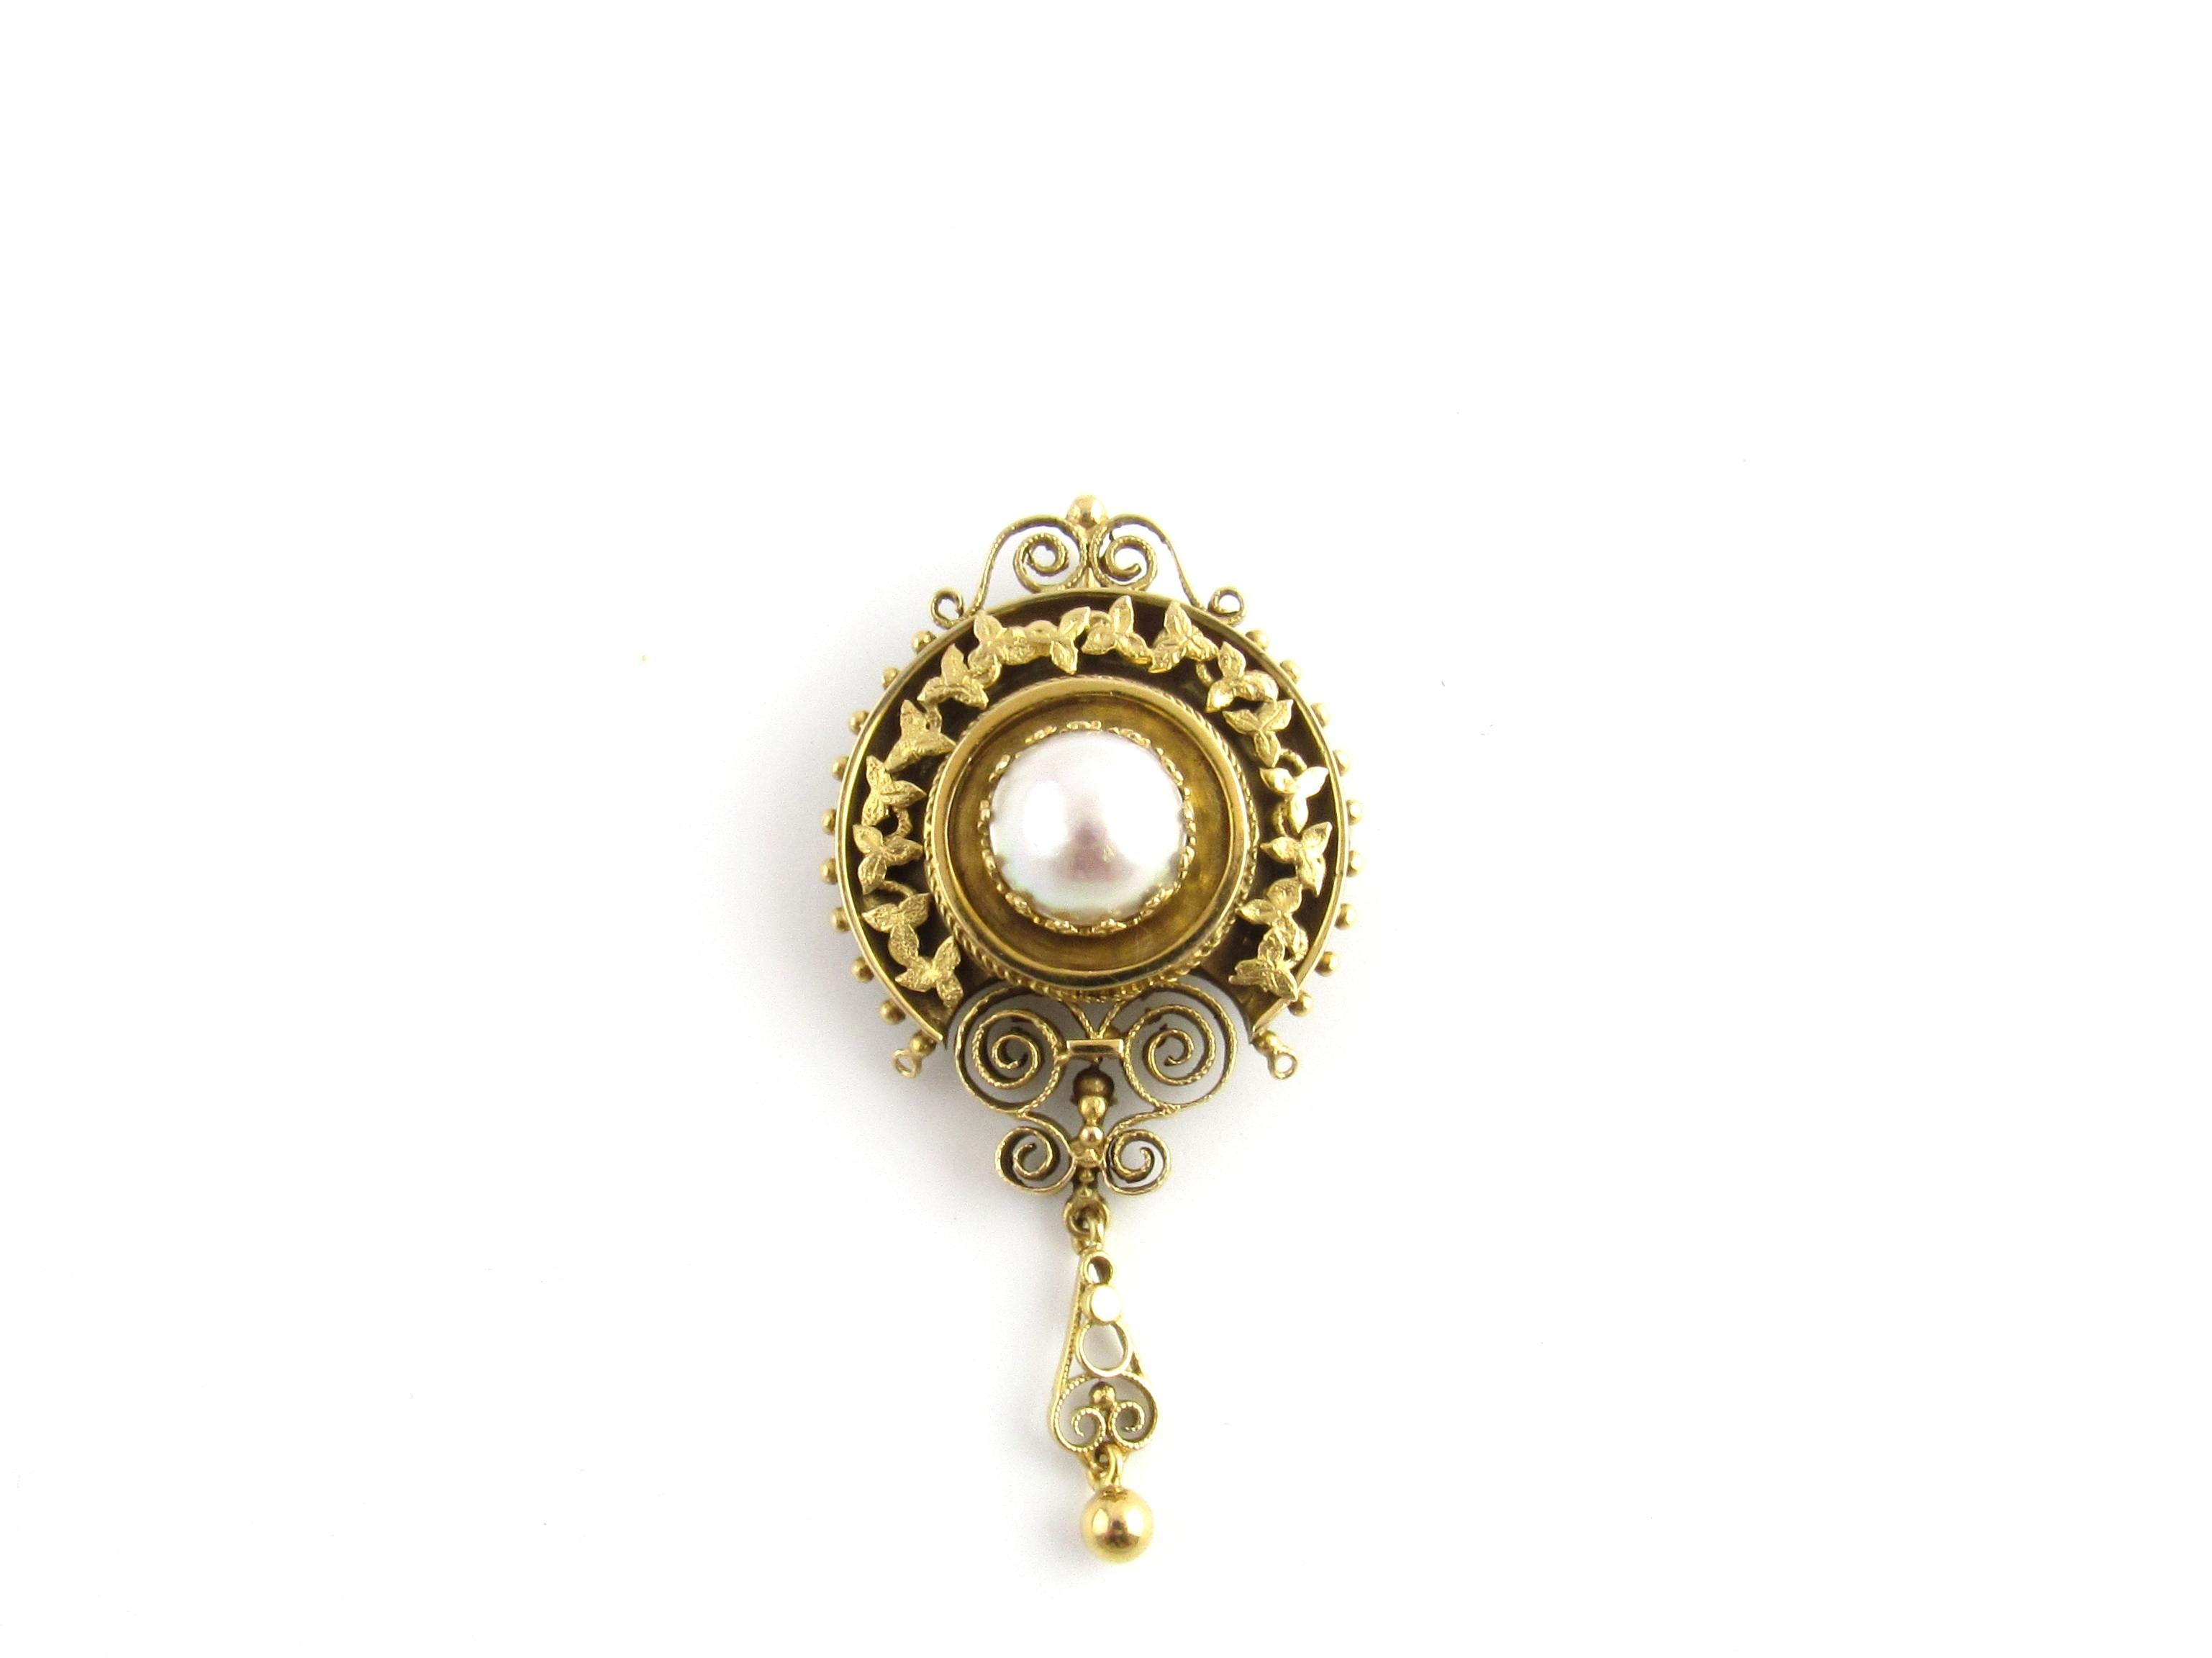 Etruscan Revival 14K Yellow Gold and Mabe Pearl Pin Pendant

Professionally polished / Tested and Stamped 14K

Mabe Pearl is 11mm
piece weights 8.3 dwt / 13 g
2 5/16 x 1 3/16